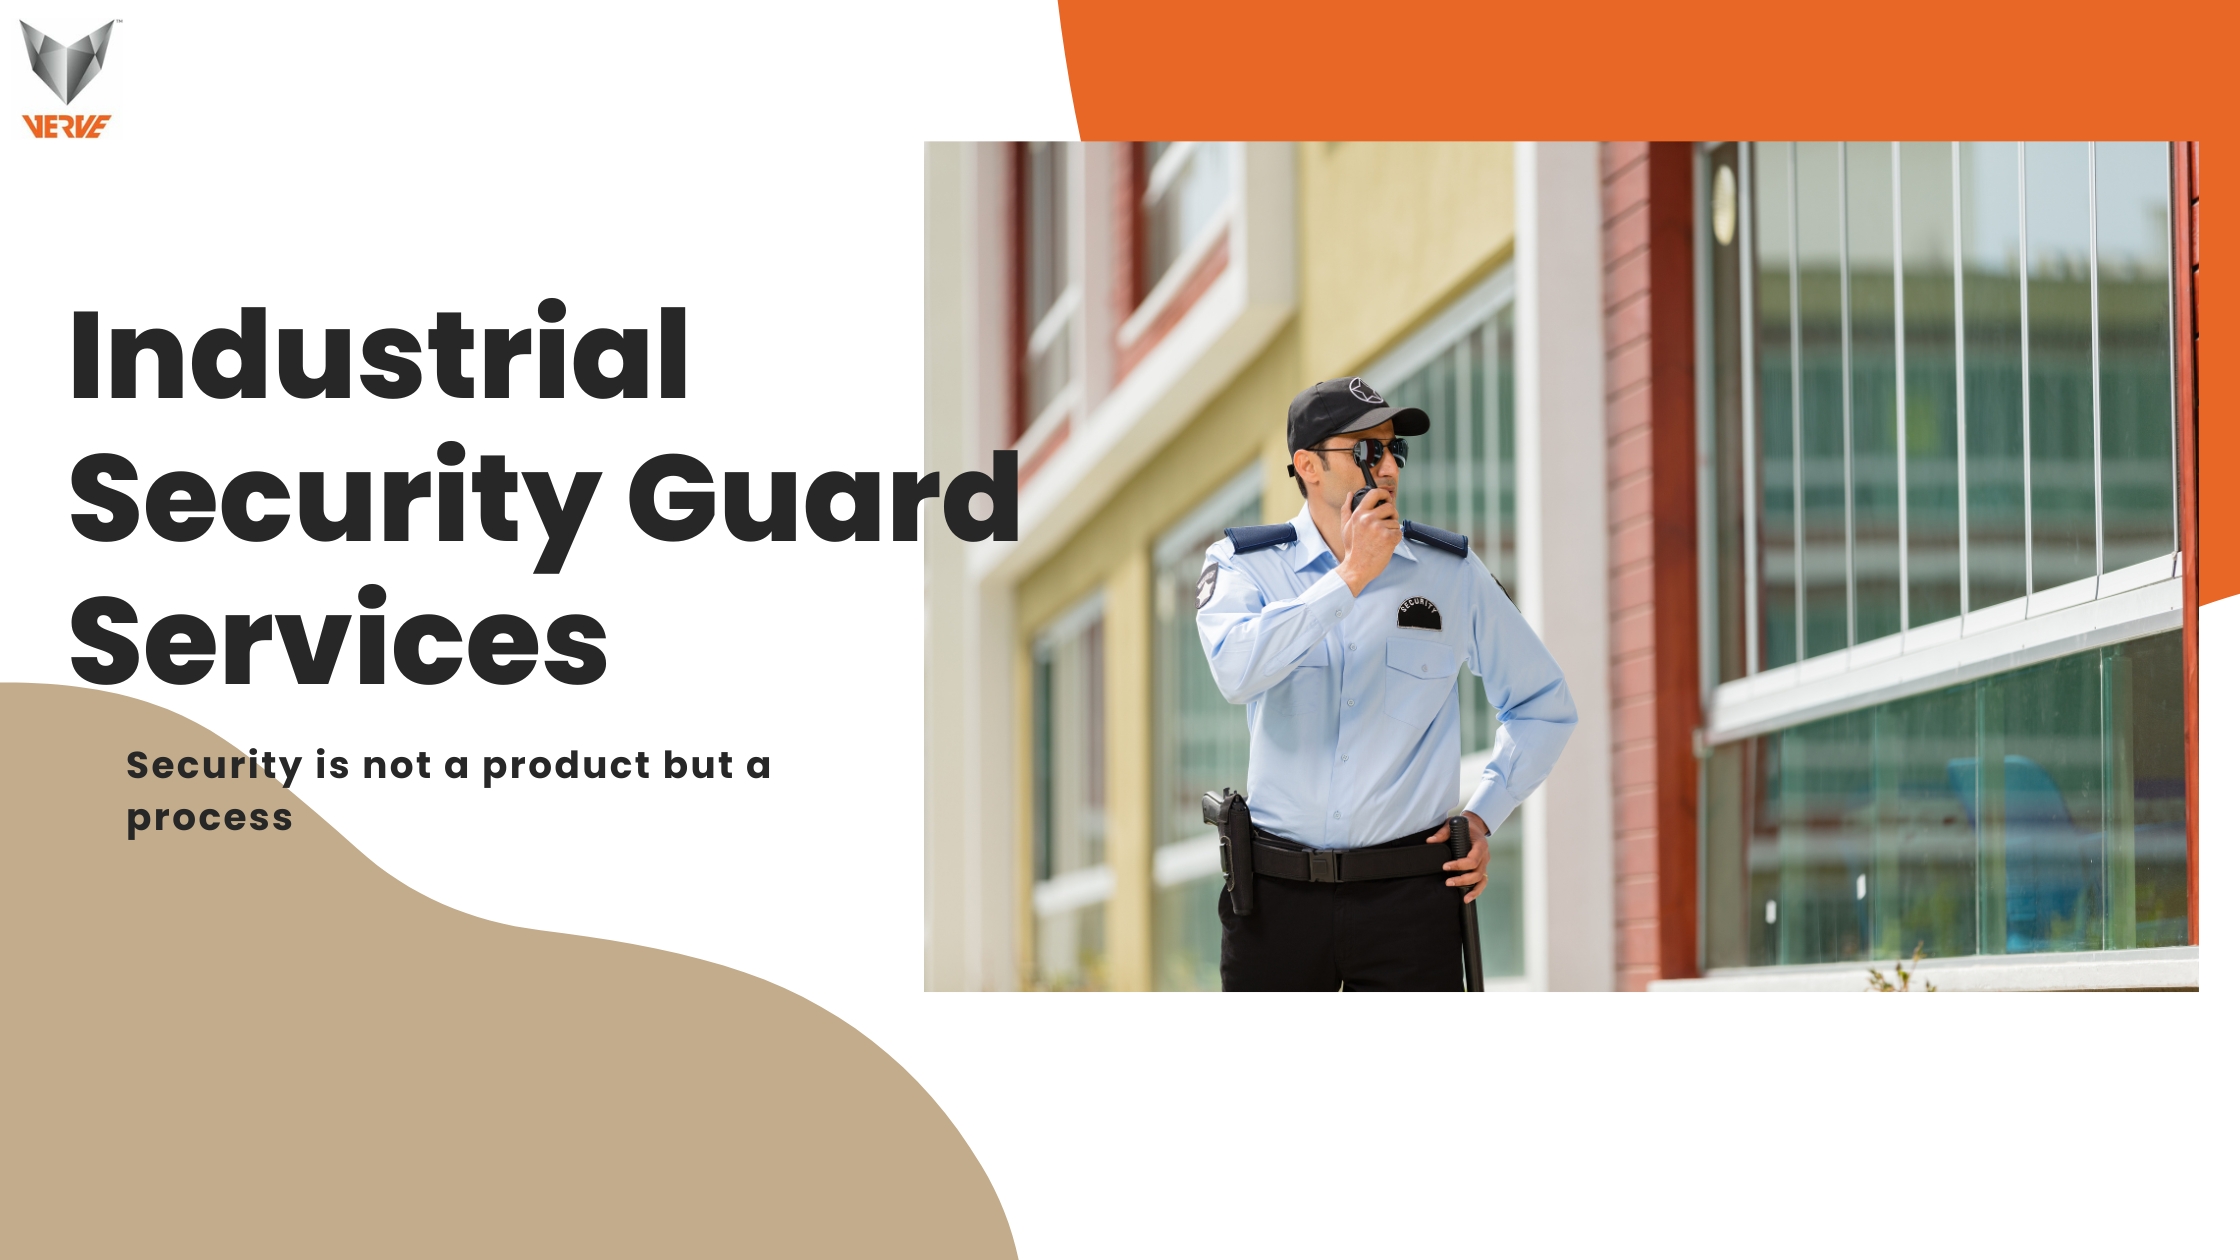 Industrial Security Guard Services